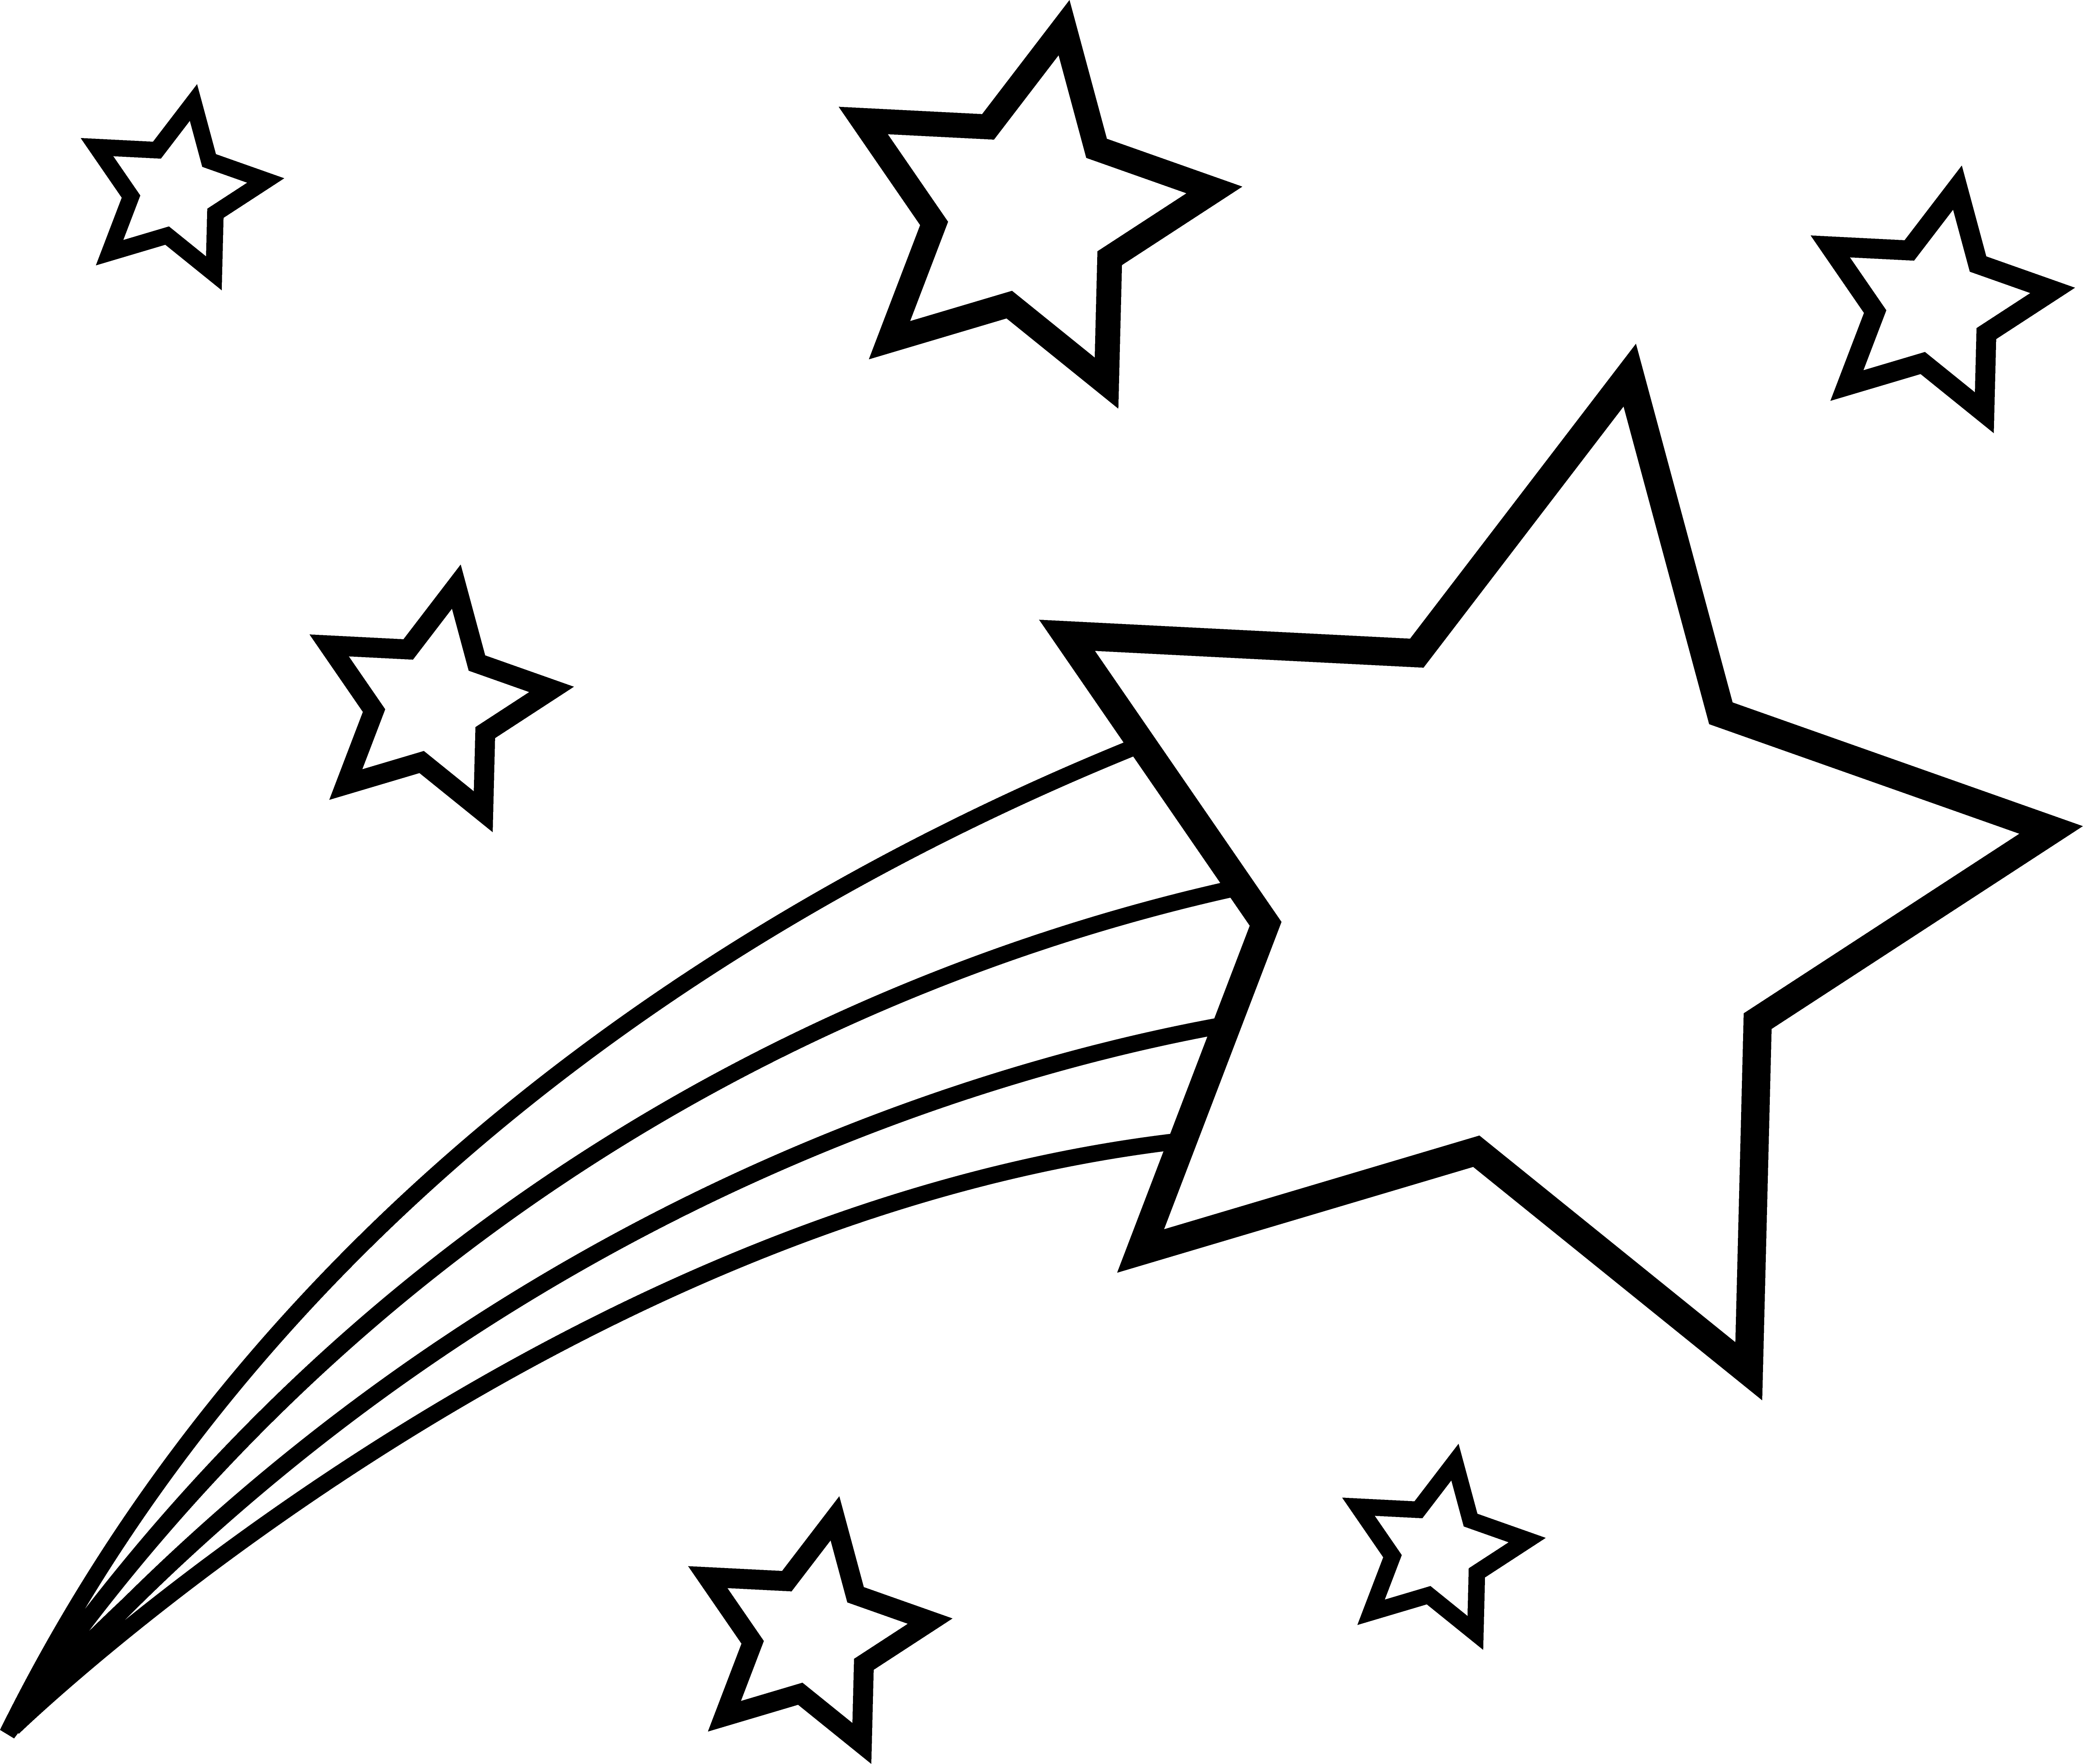 Shooting star outline to. Clipart stars comets